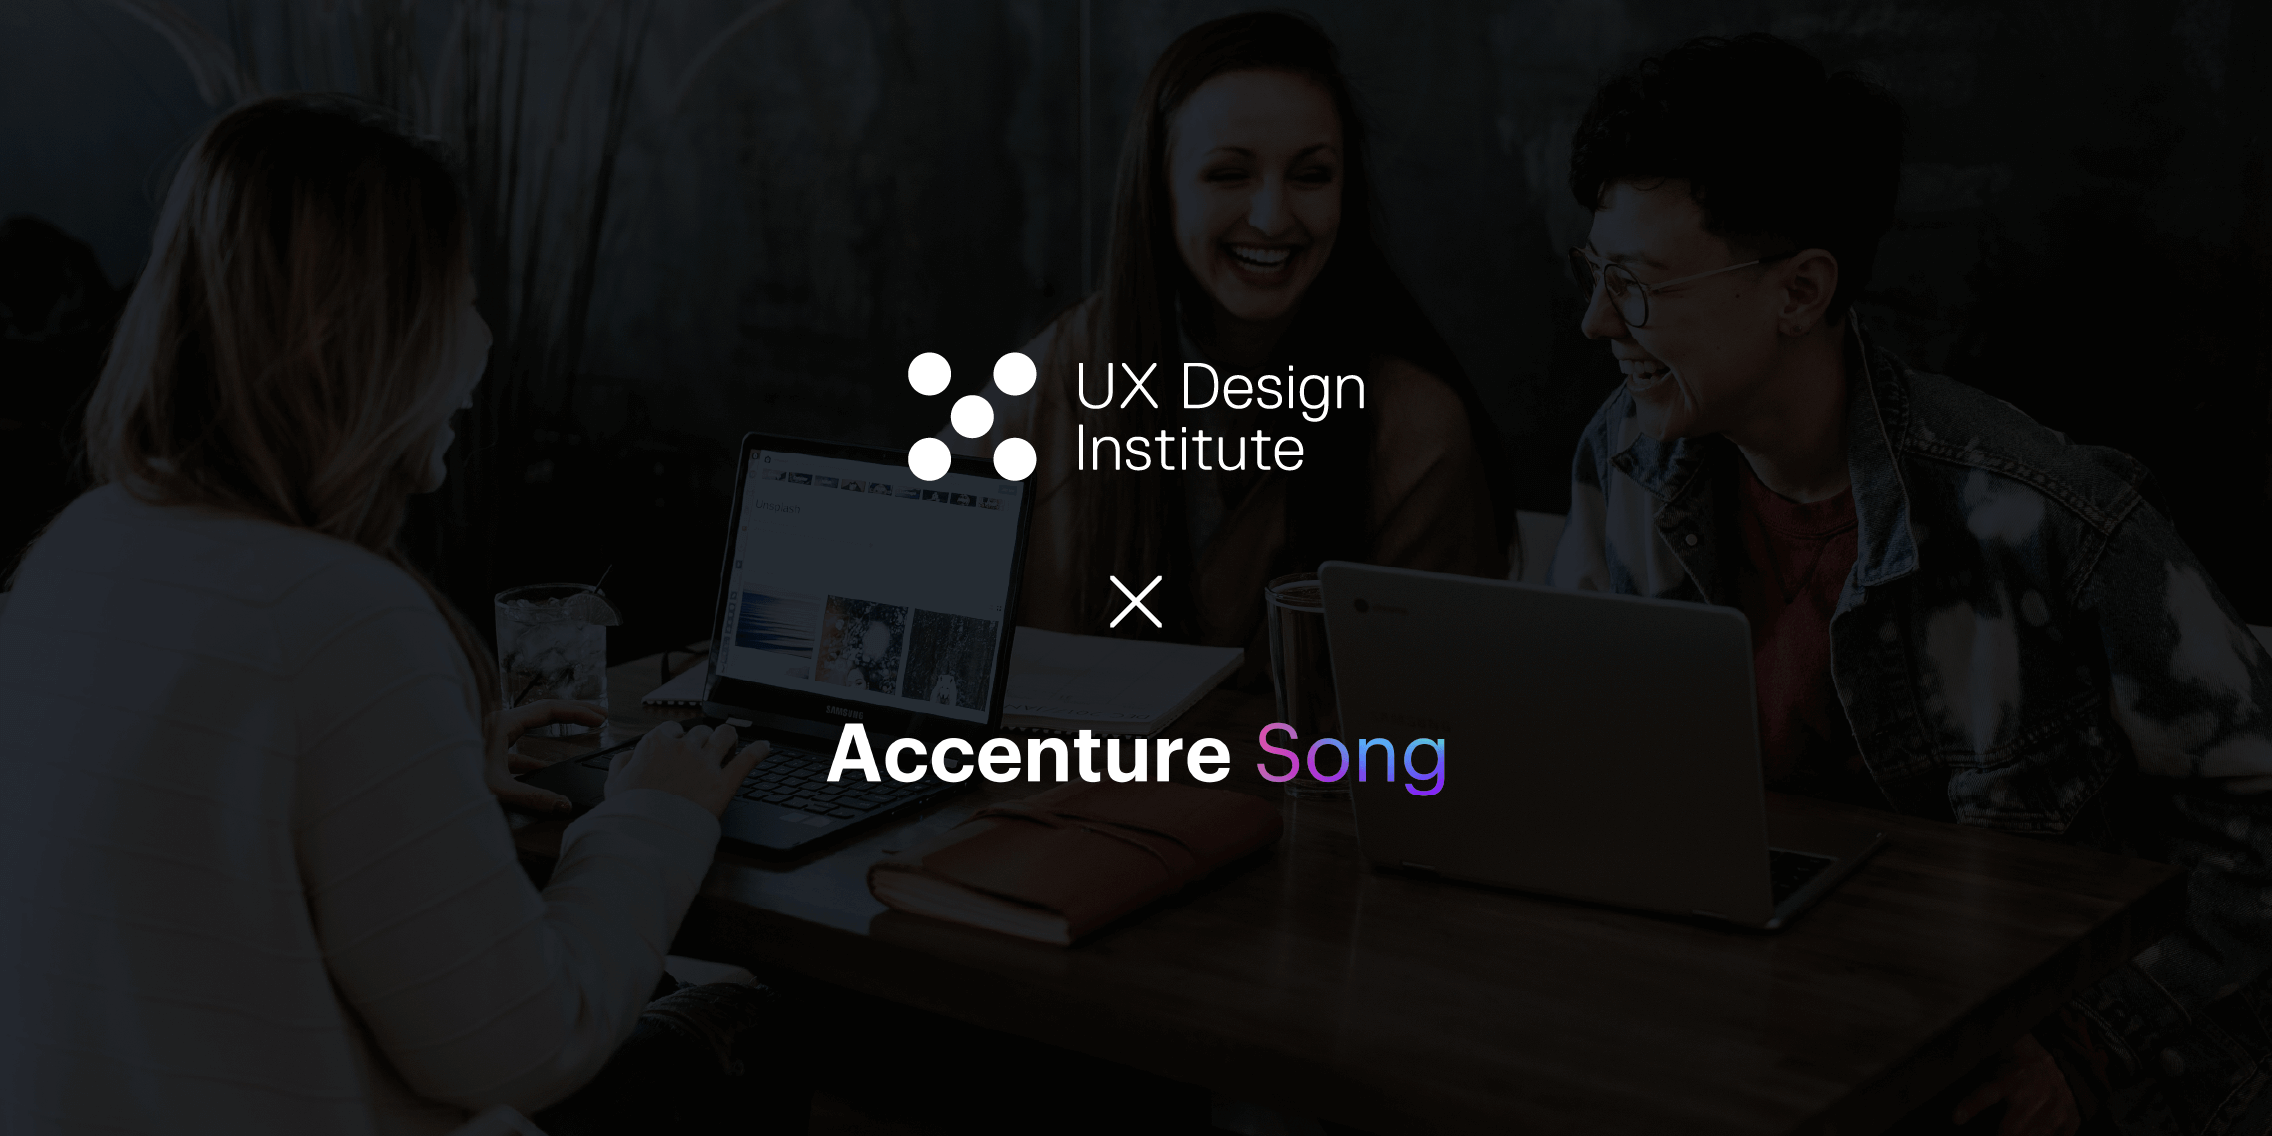 UX Design Institute partners with Accenture Song for Internship ...